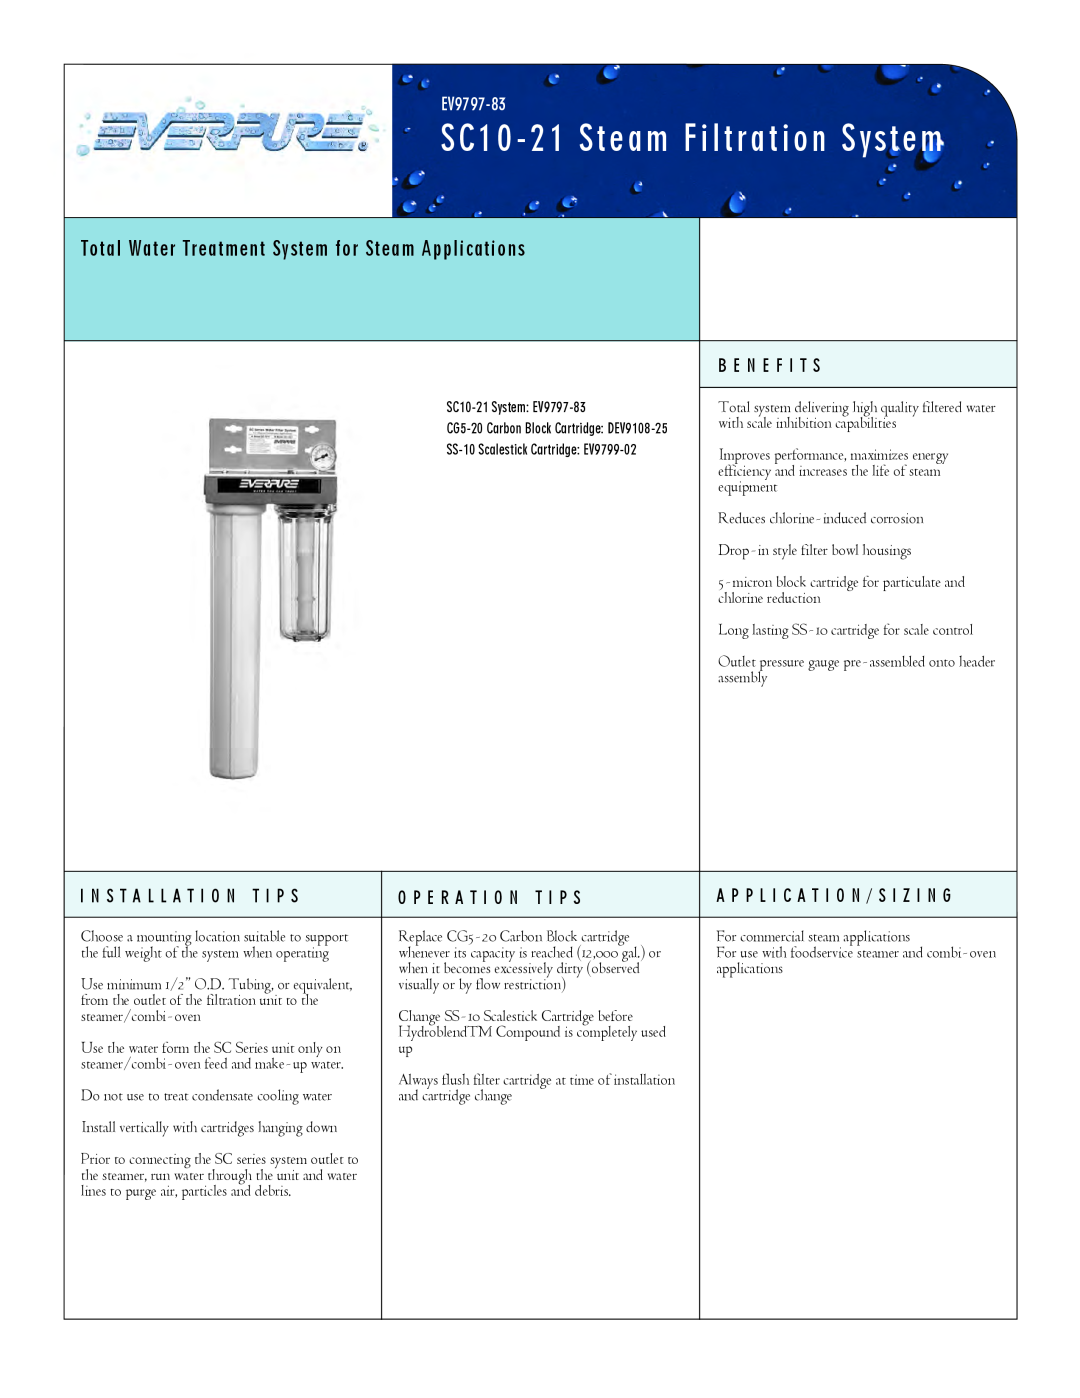 Everpure DEV9108-25, SC10-21 manual SC10 - 21 Steam Filtration System, Total Water Treatment System for Steam Applications 